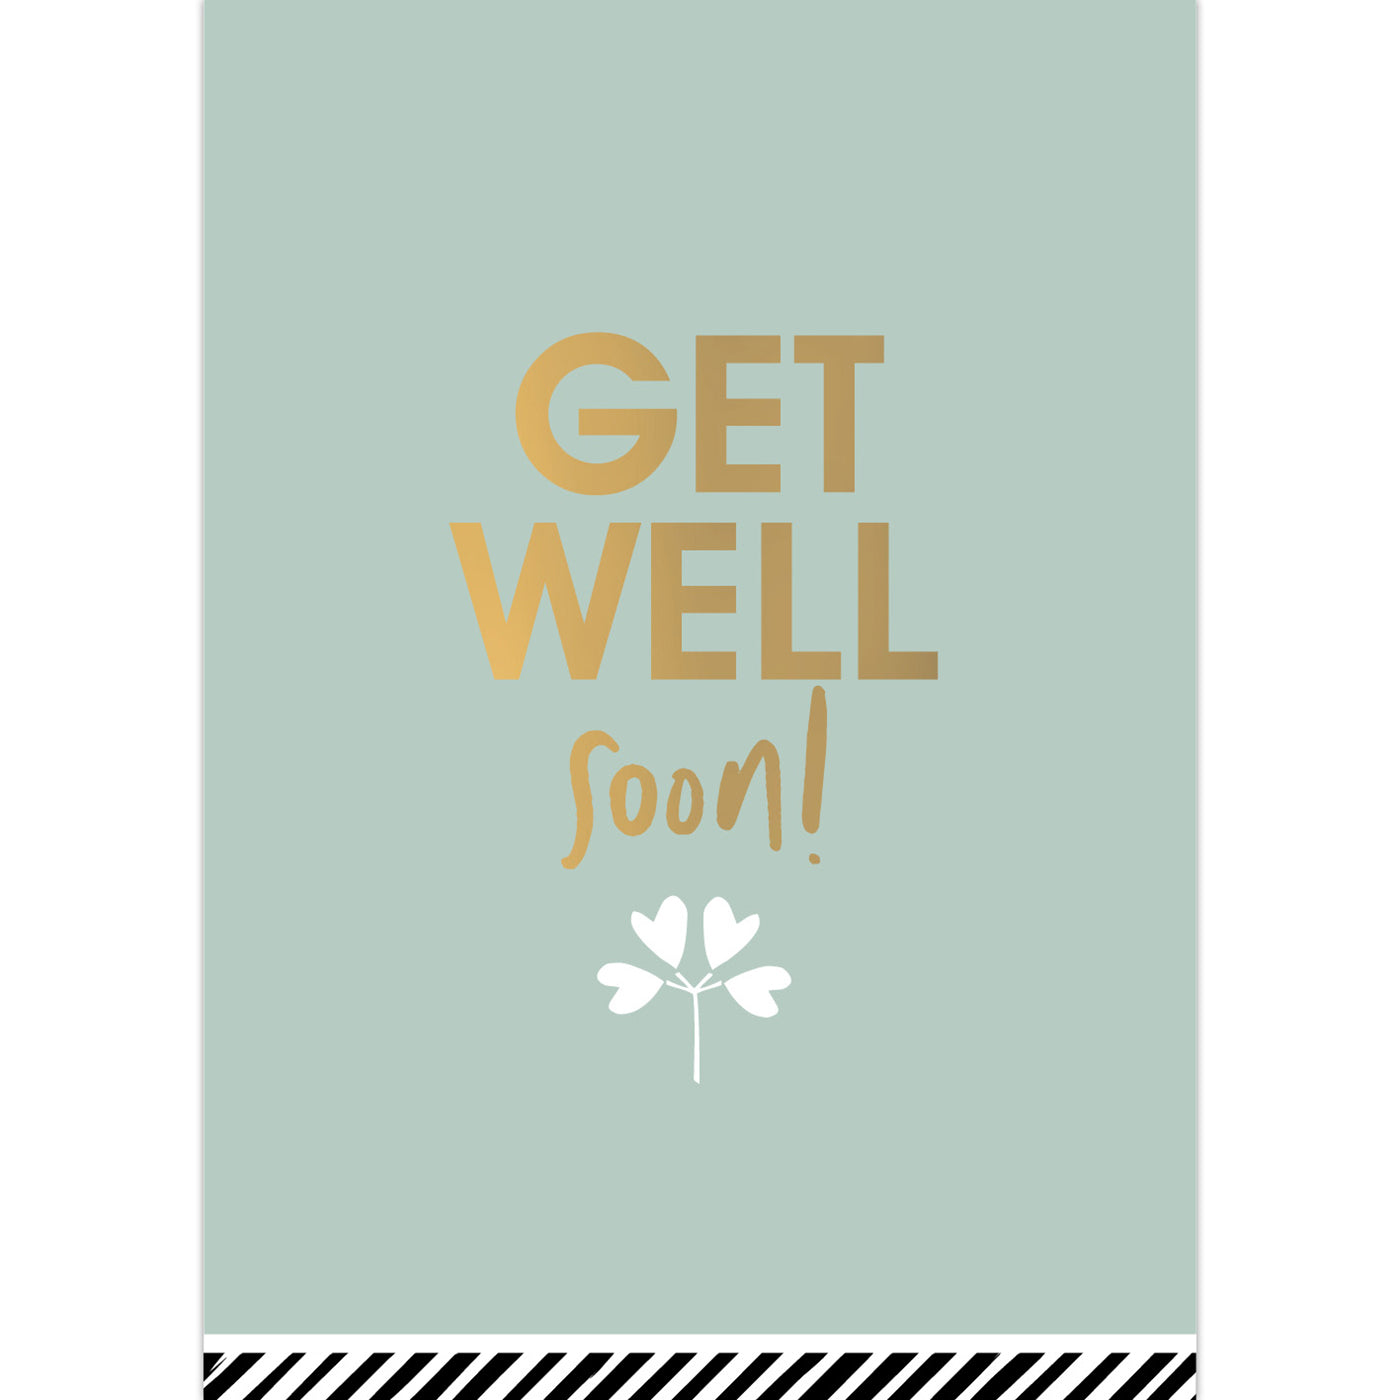 Get well soon A6 greeting card